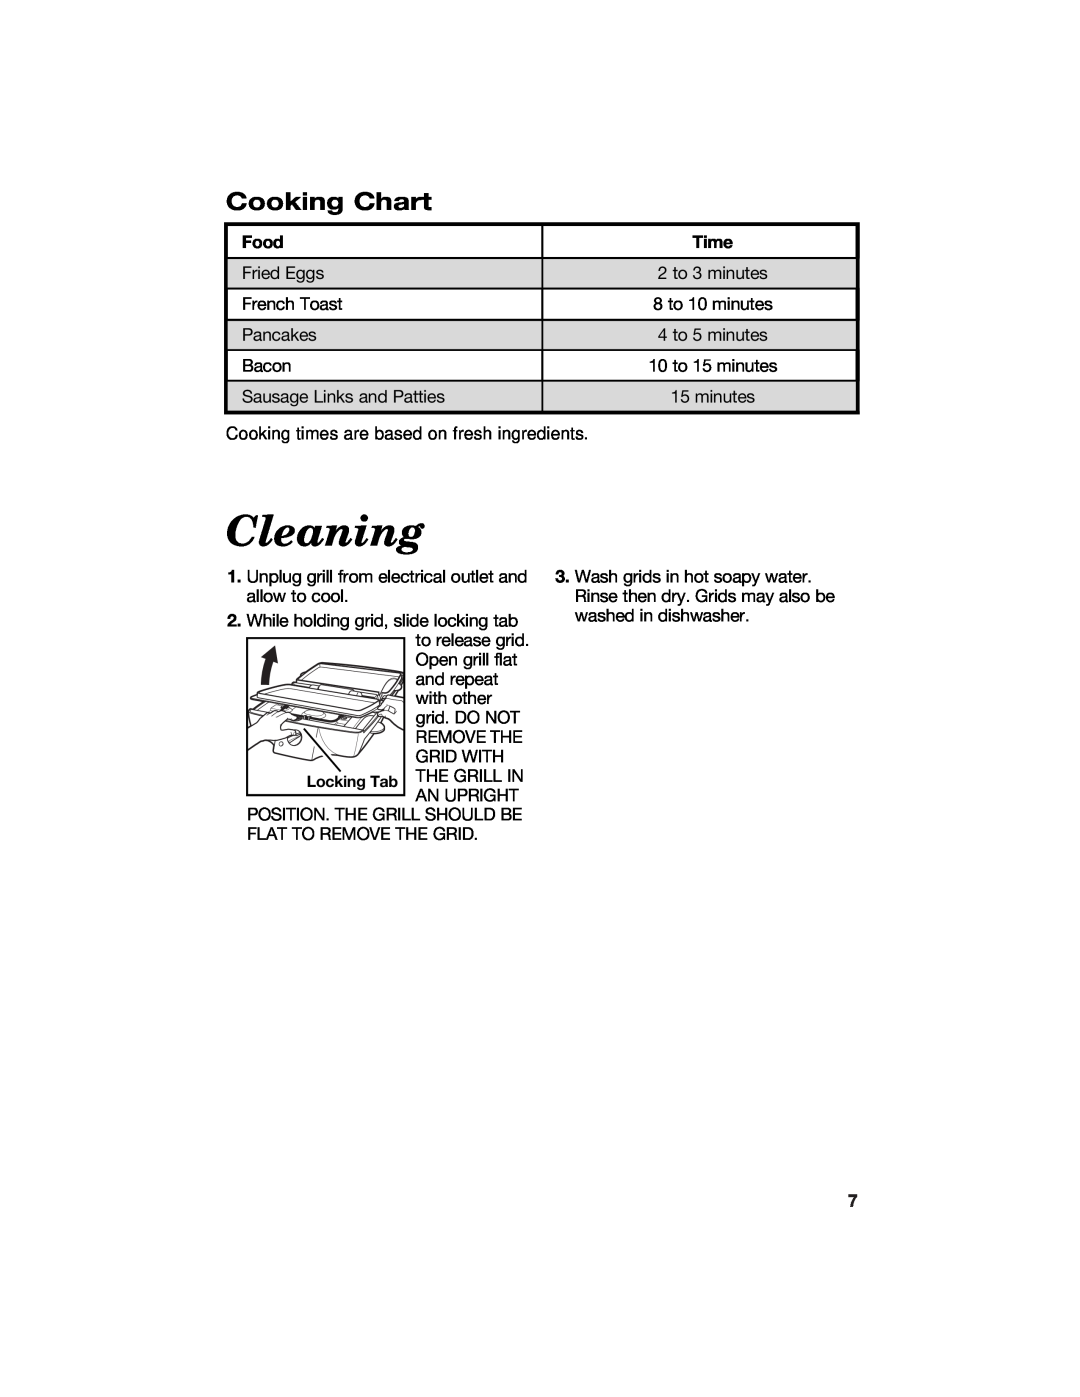 Hamilton Beach 840125300 manual Cleaning, Cooking Chart, Food, Time 